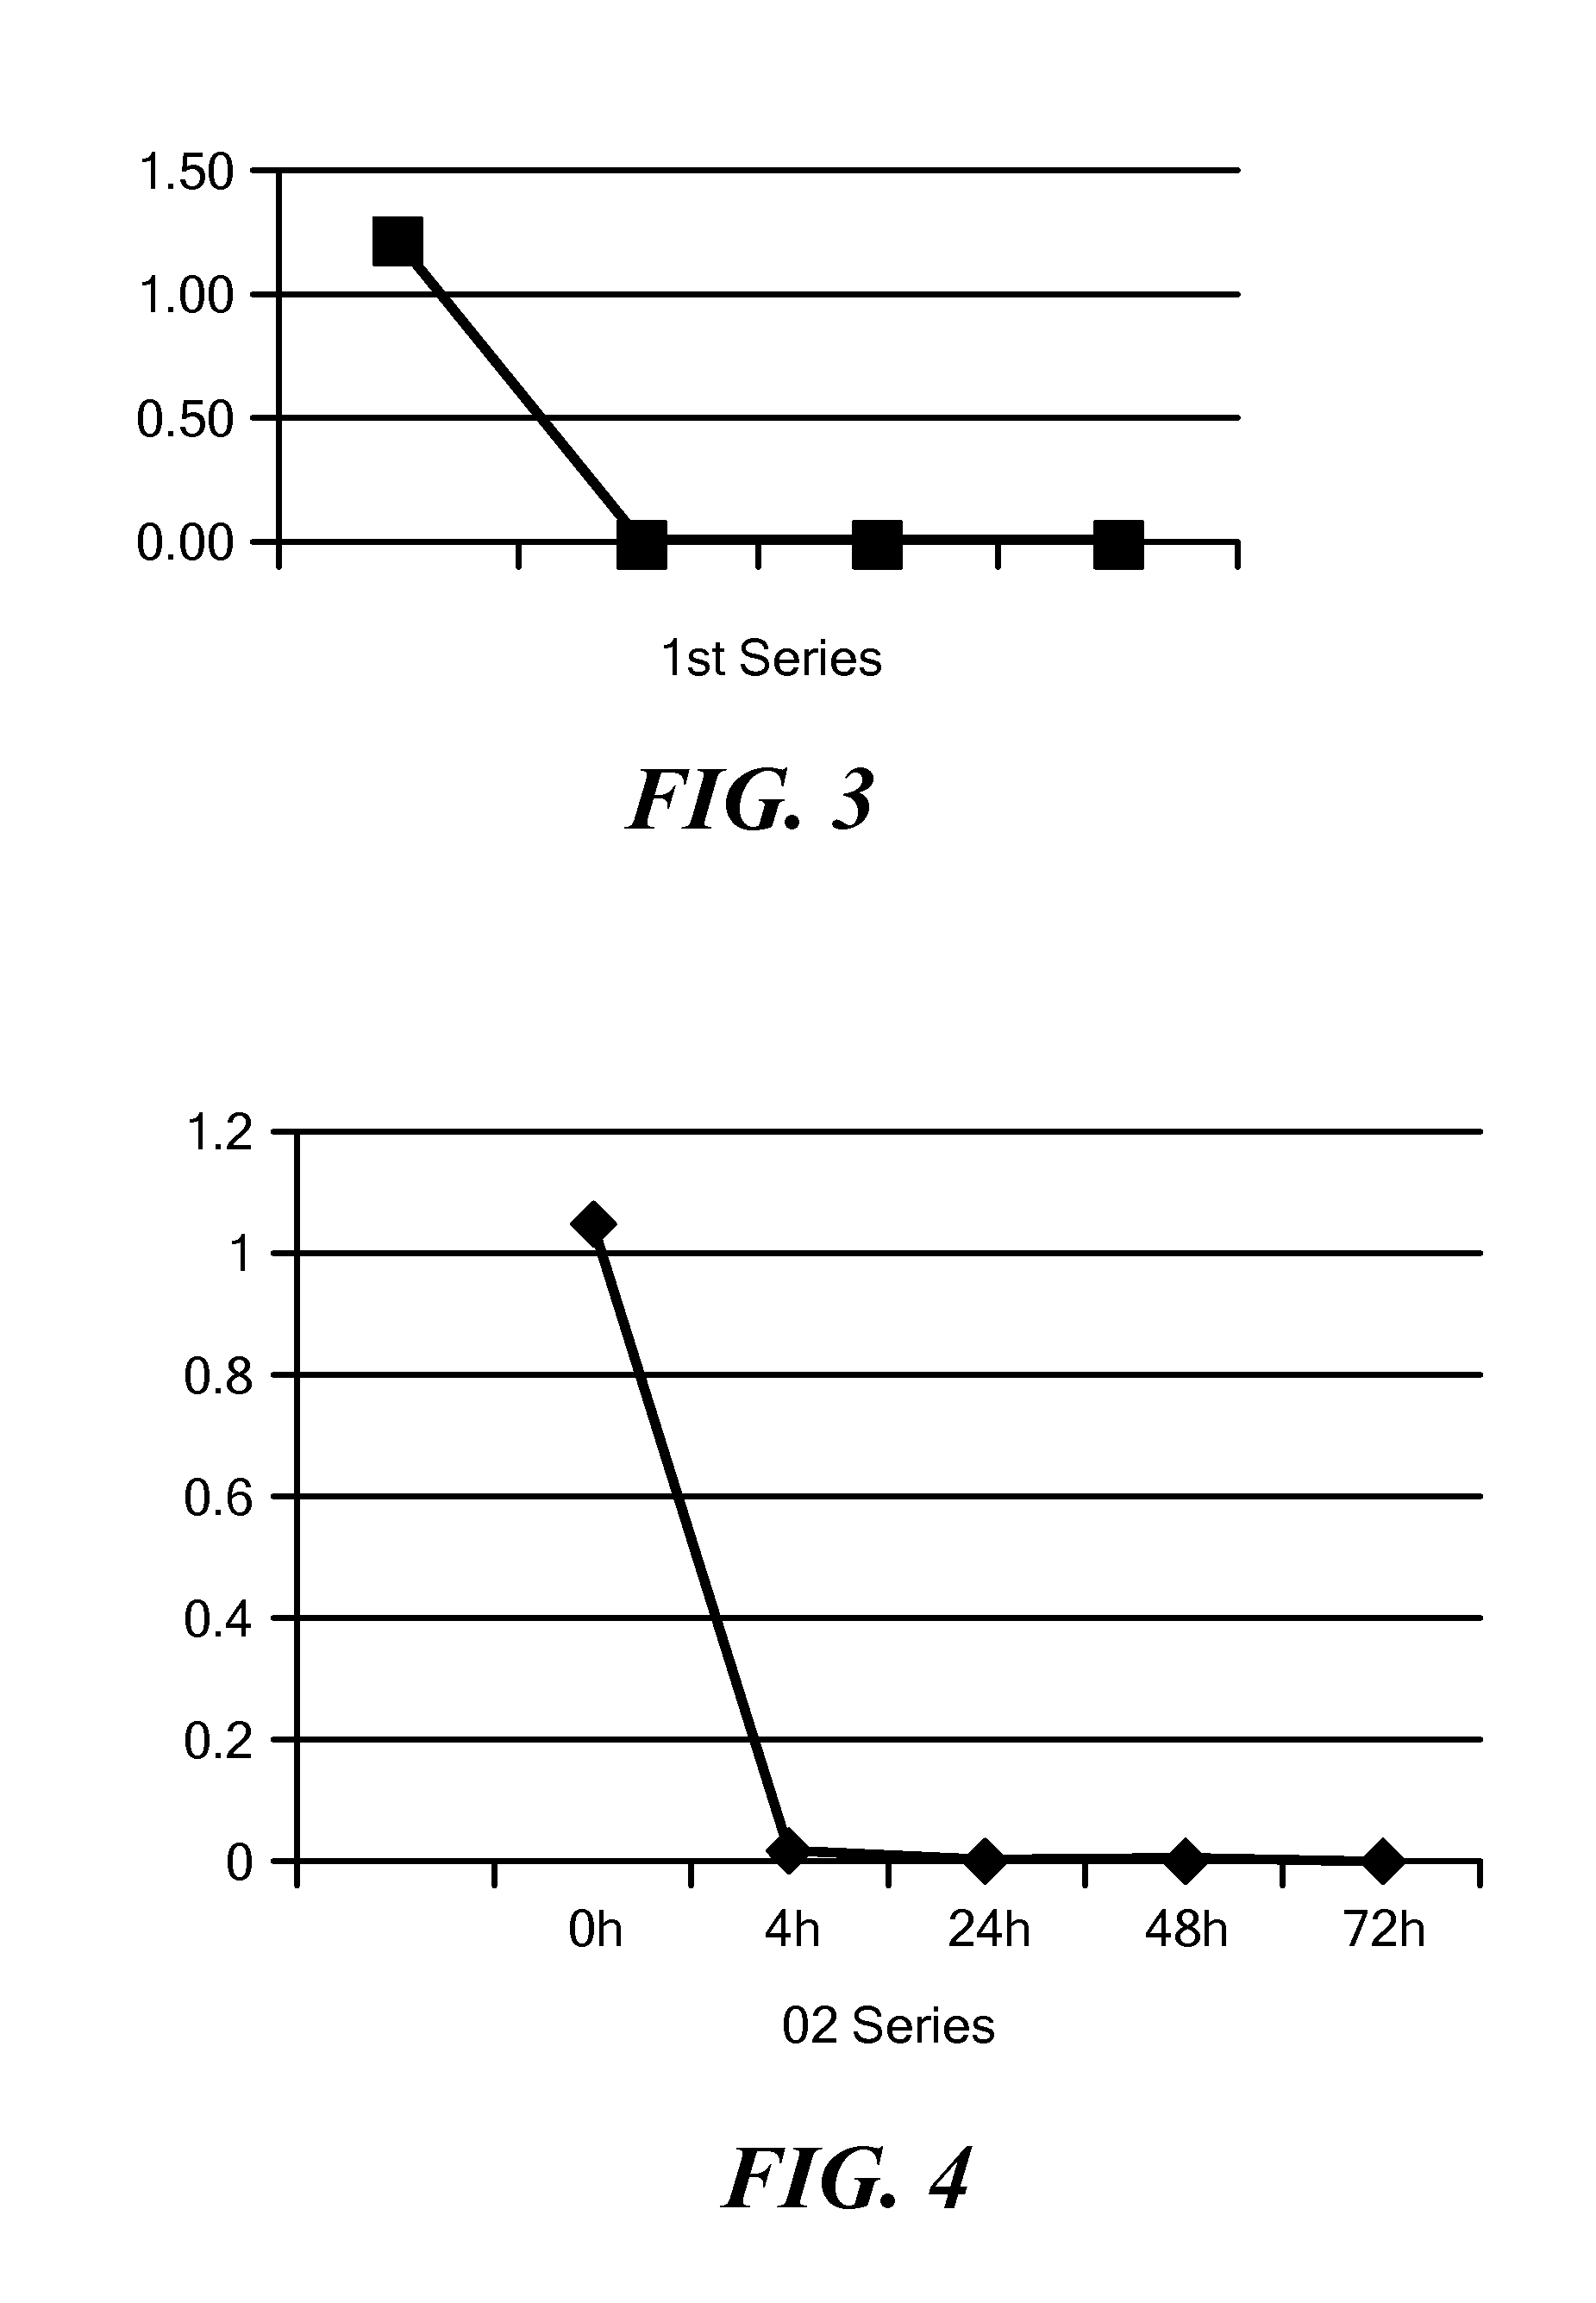 System and Method for Deactivation and Disposal of a Pharmaceutical Dosage Form